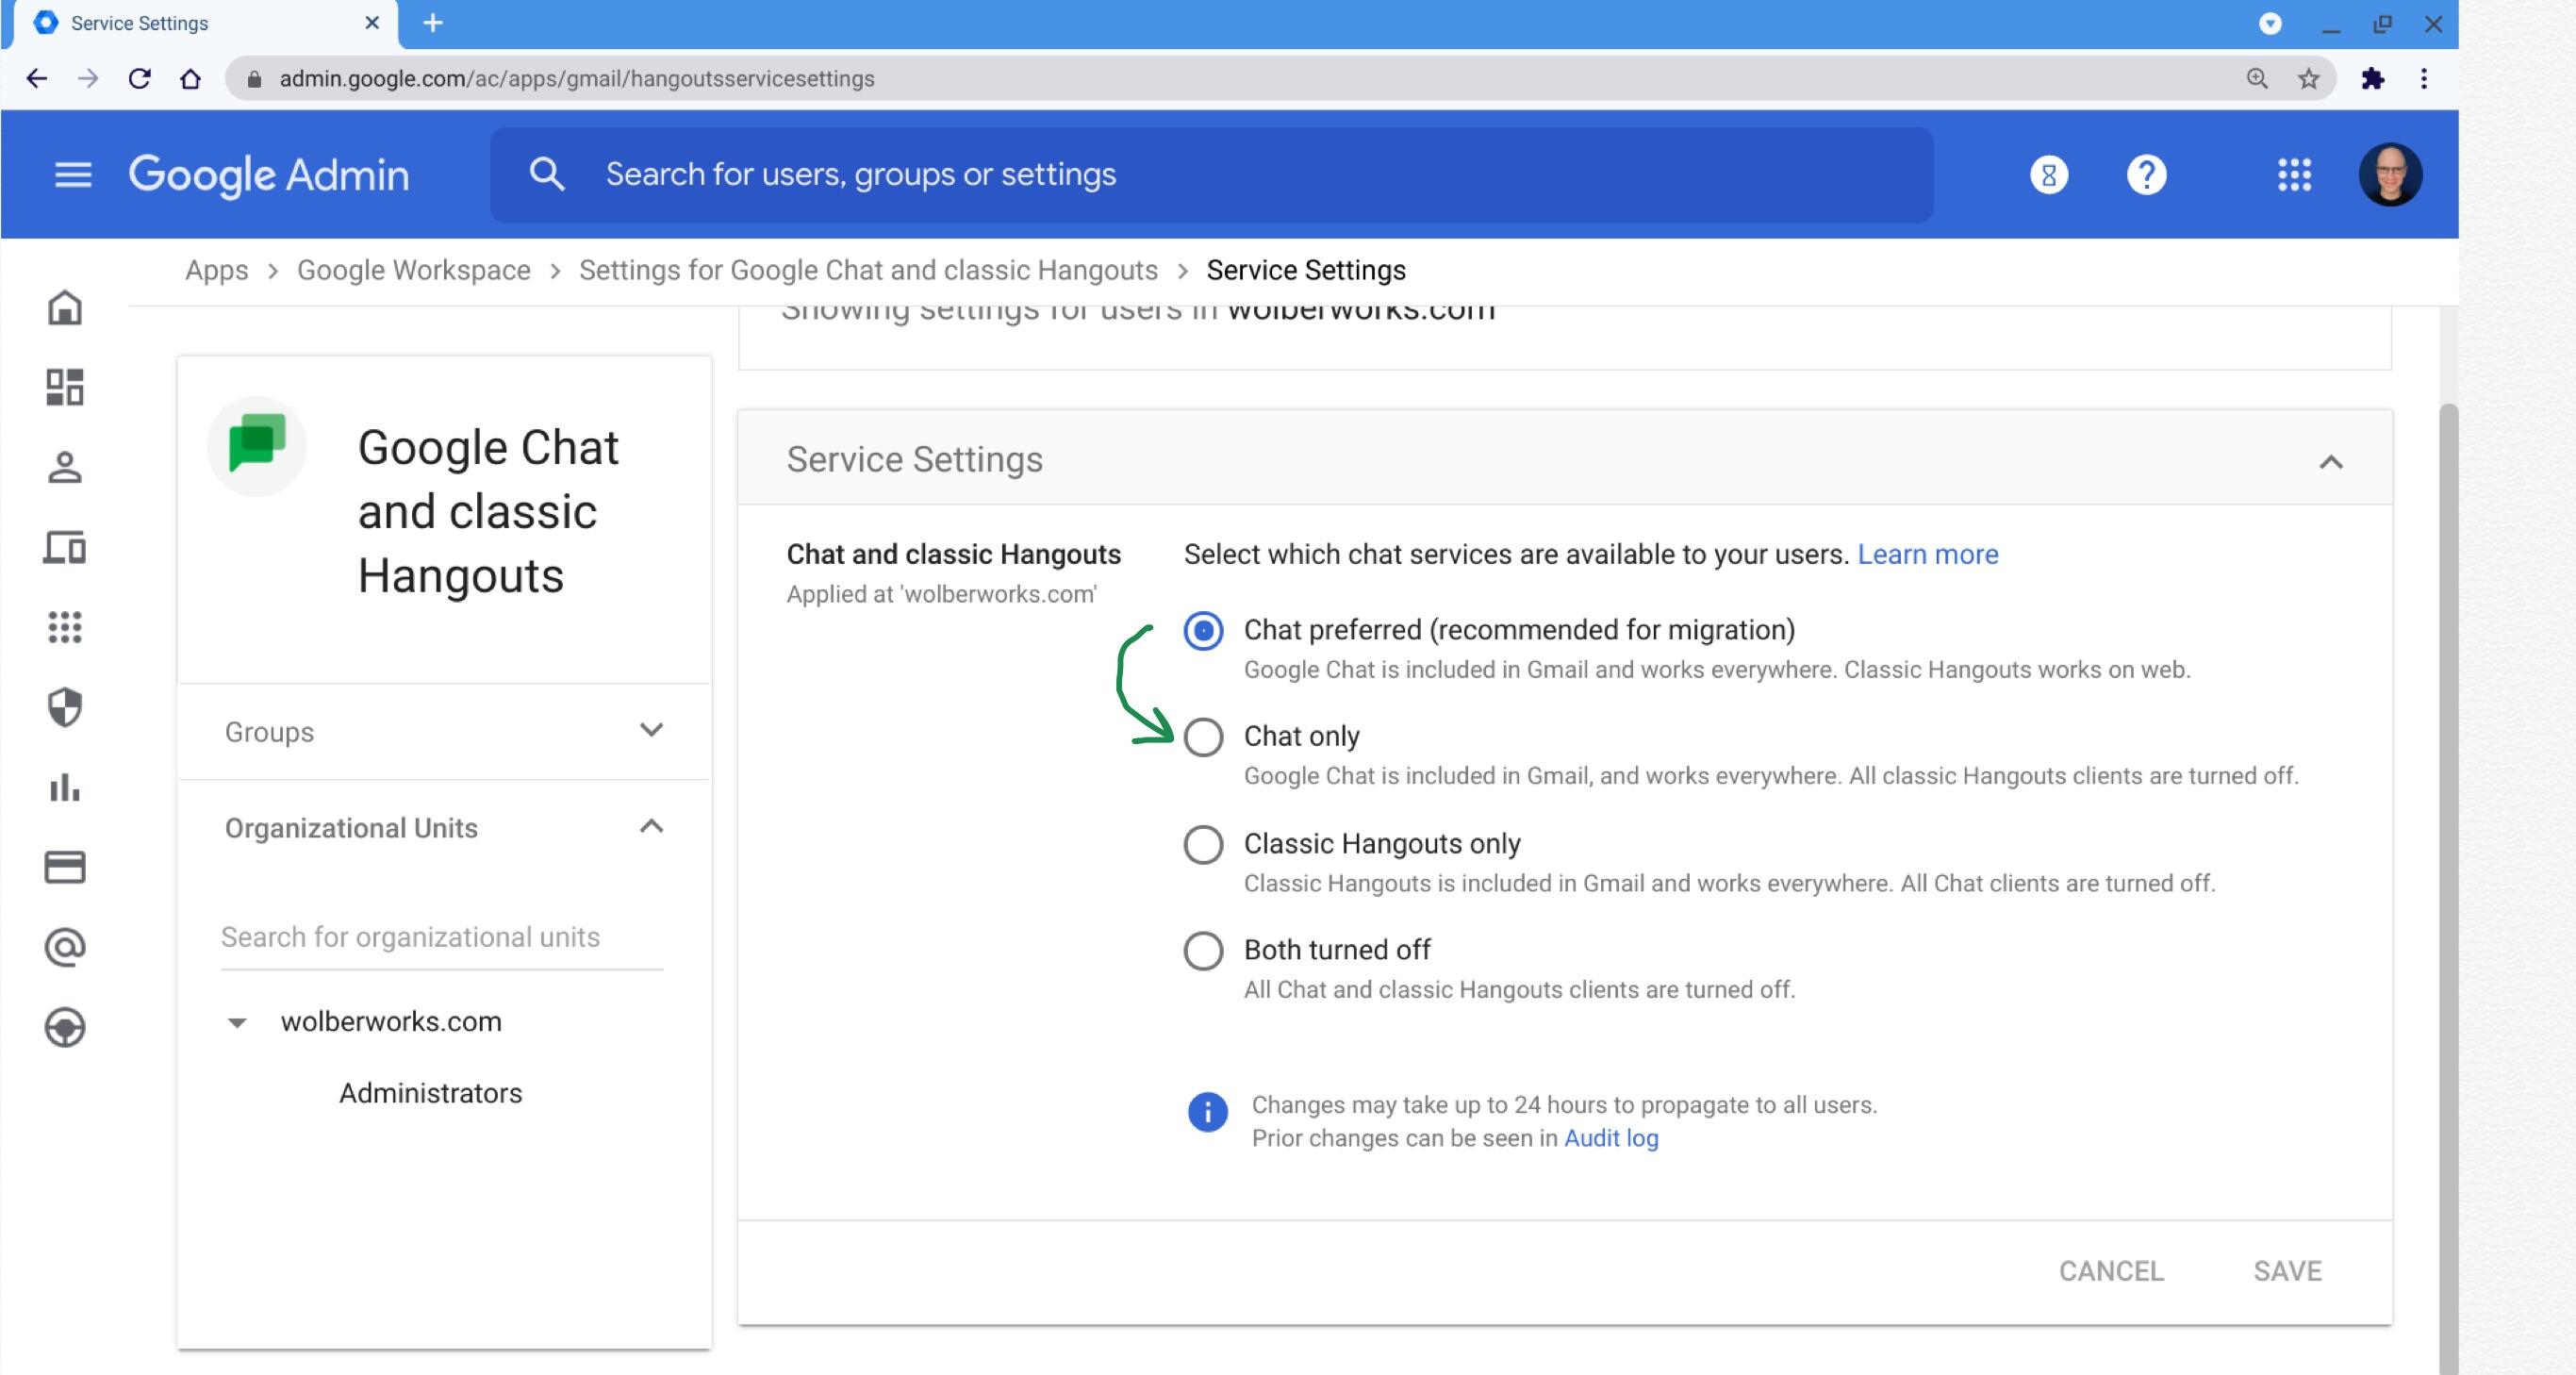 Screenshot of Google Chat and classic Hangouts service settings. Shows 